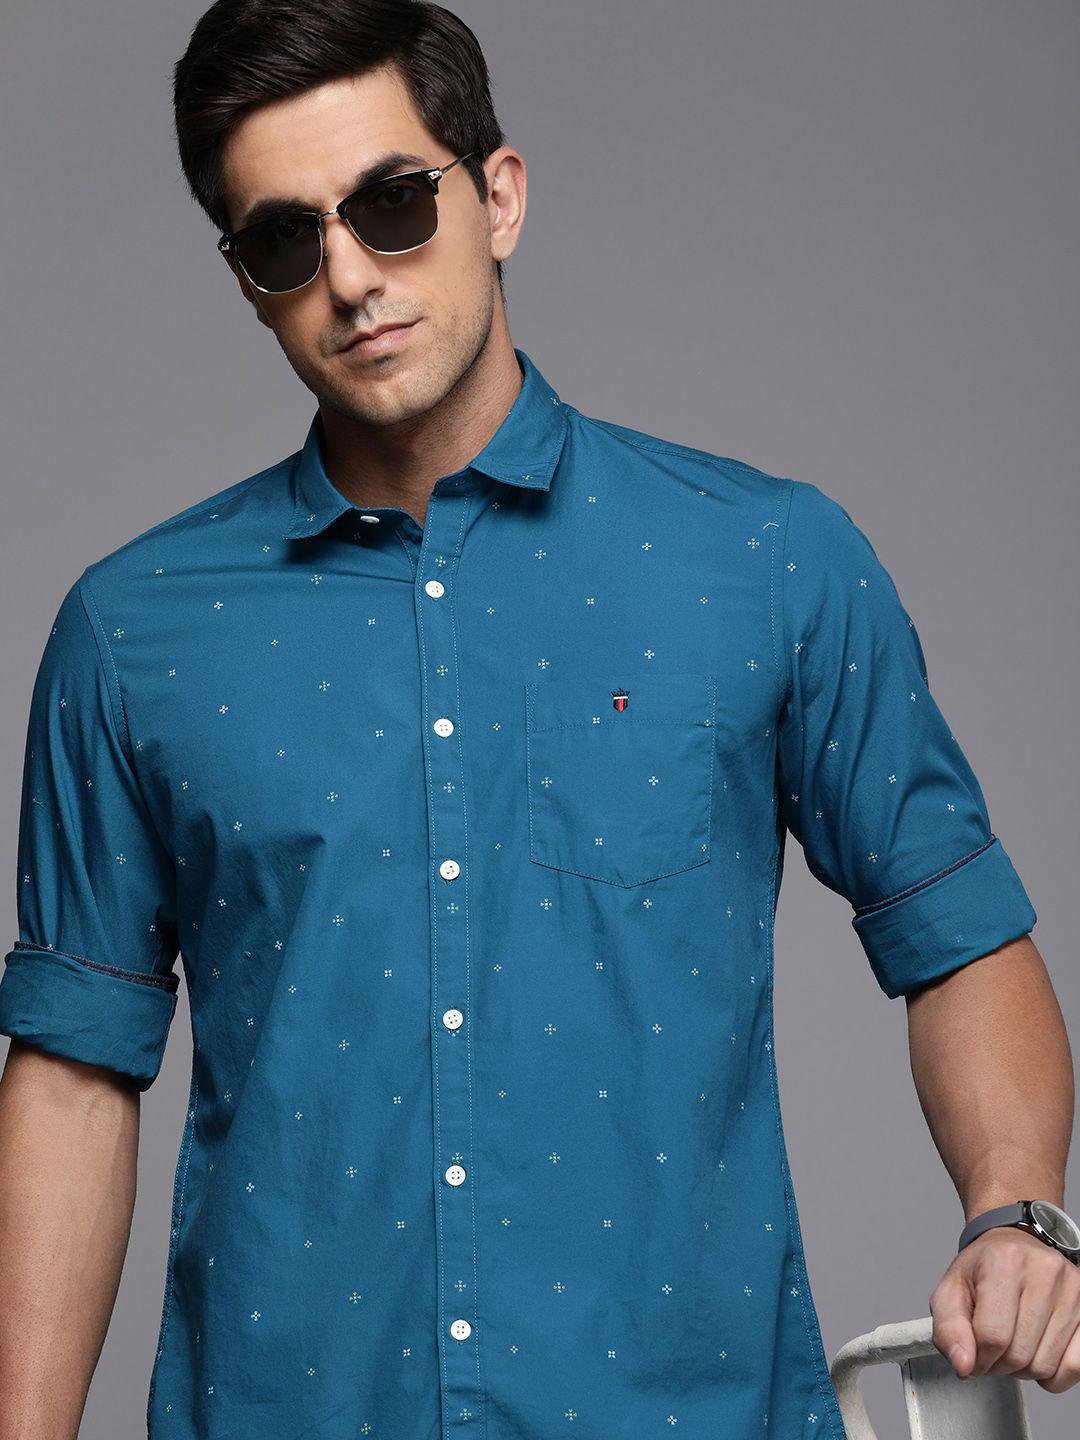 louis-philippe-jeans-slim-fit-geometric-printed-pure-cotton-casual-shirt